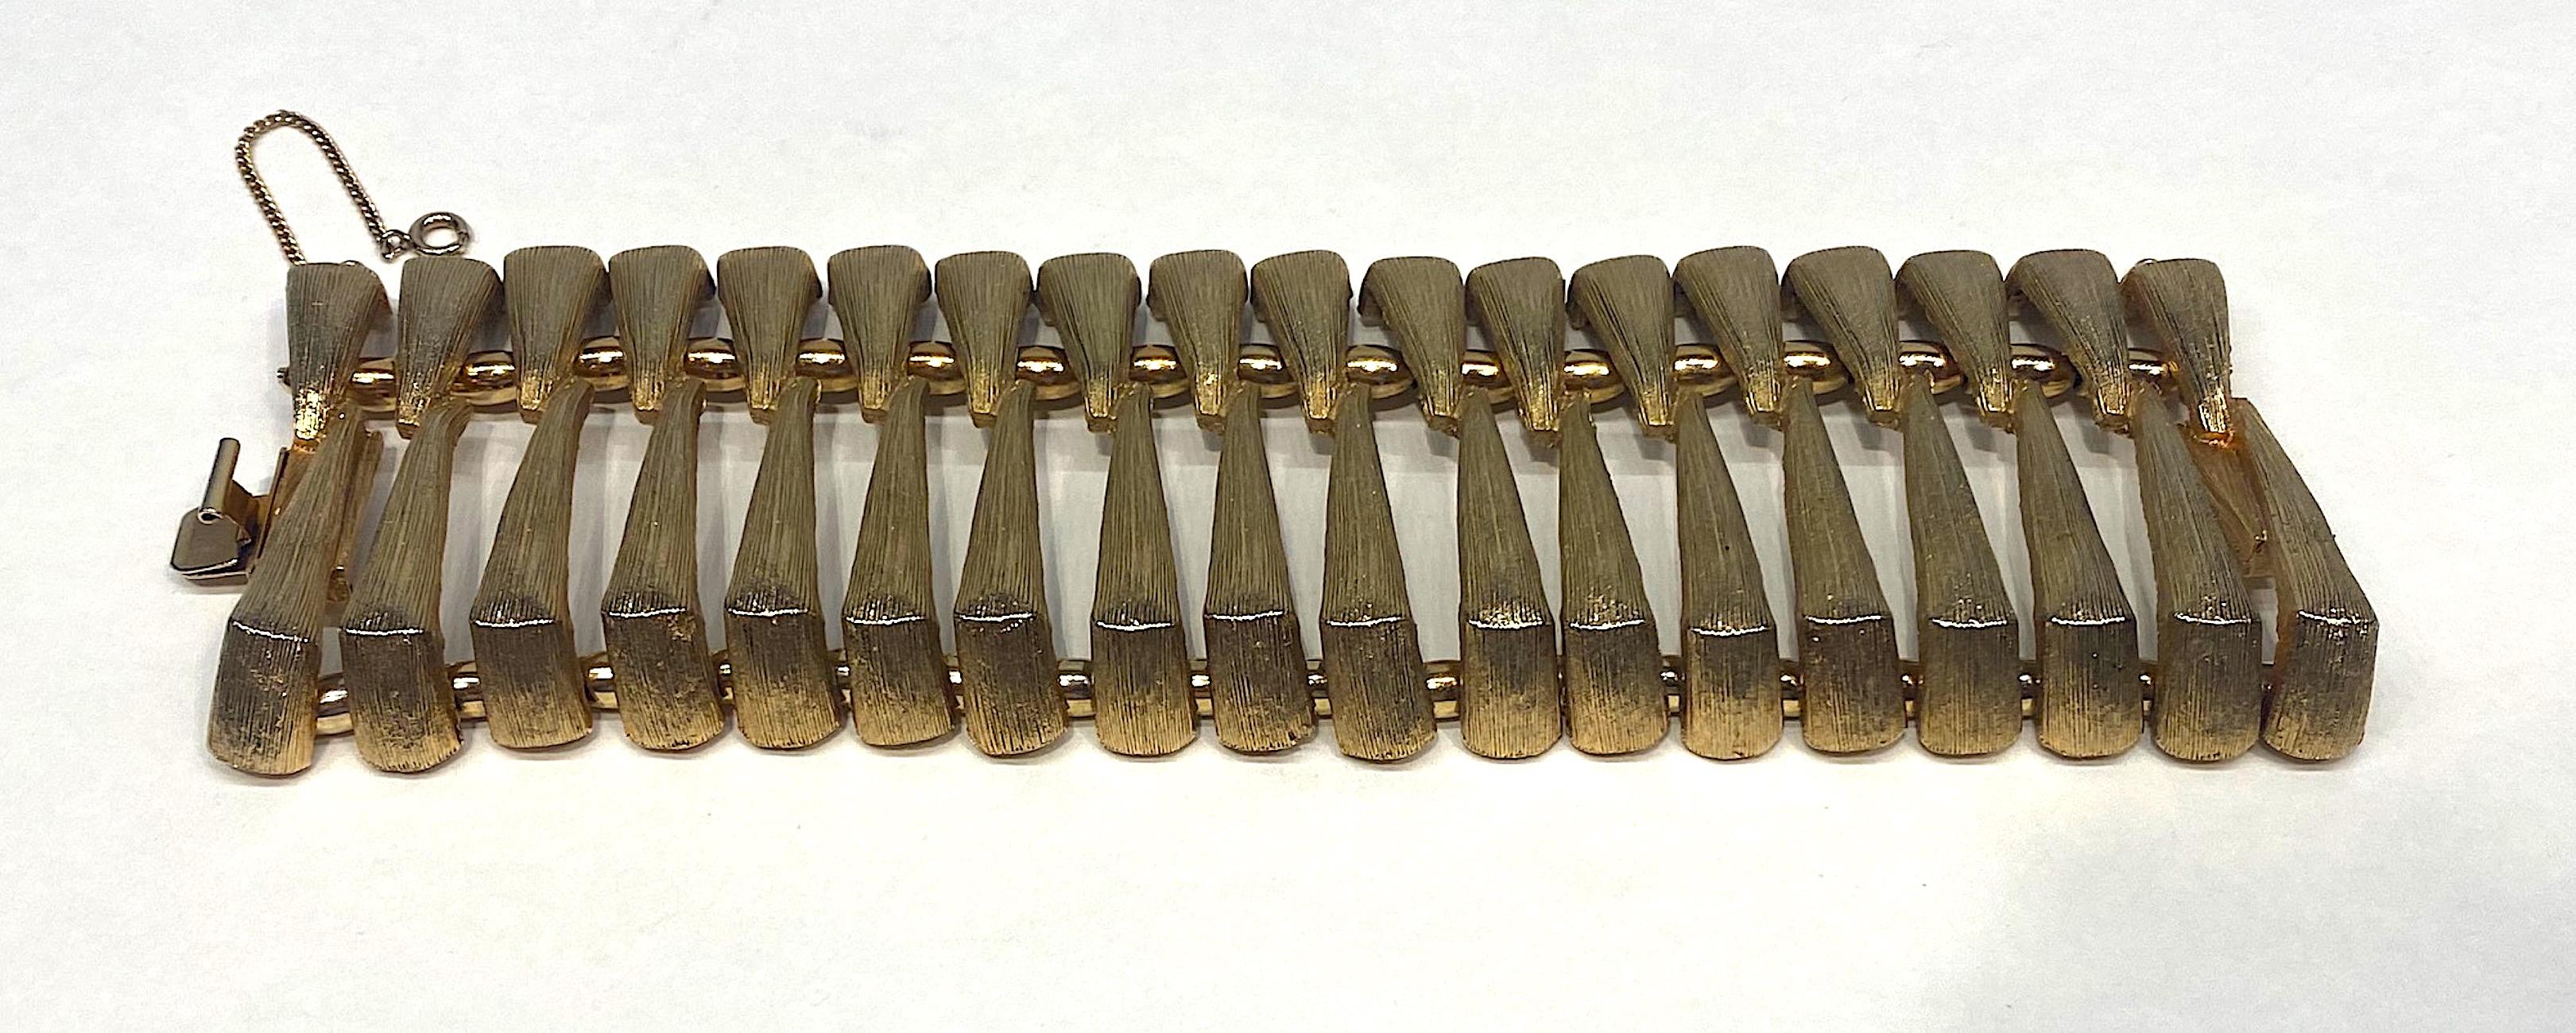 A rare wide Trifari mid to late 1950s bracelet in a textured satin gold plate. The design is three dimensional and abstract in the use of eighteen 2.13 inch wide links. The links are cast with the illusion of two separate triangular pieces facing